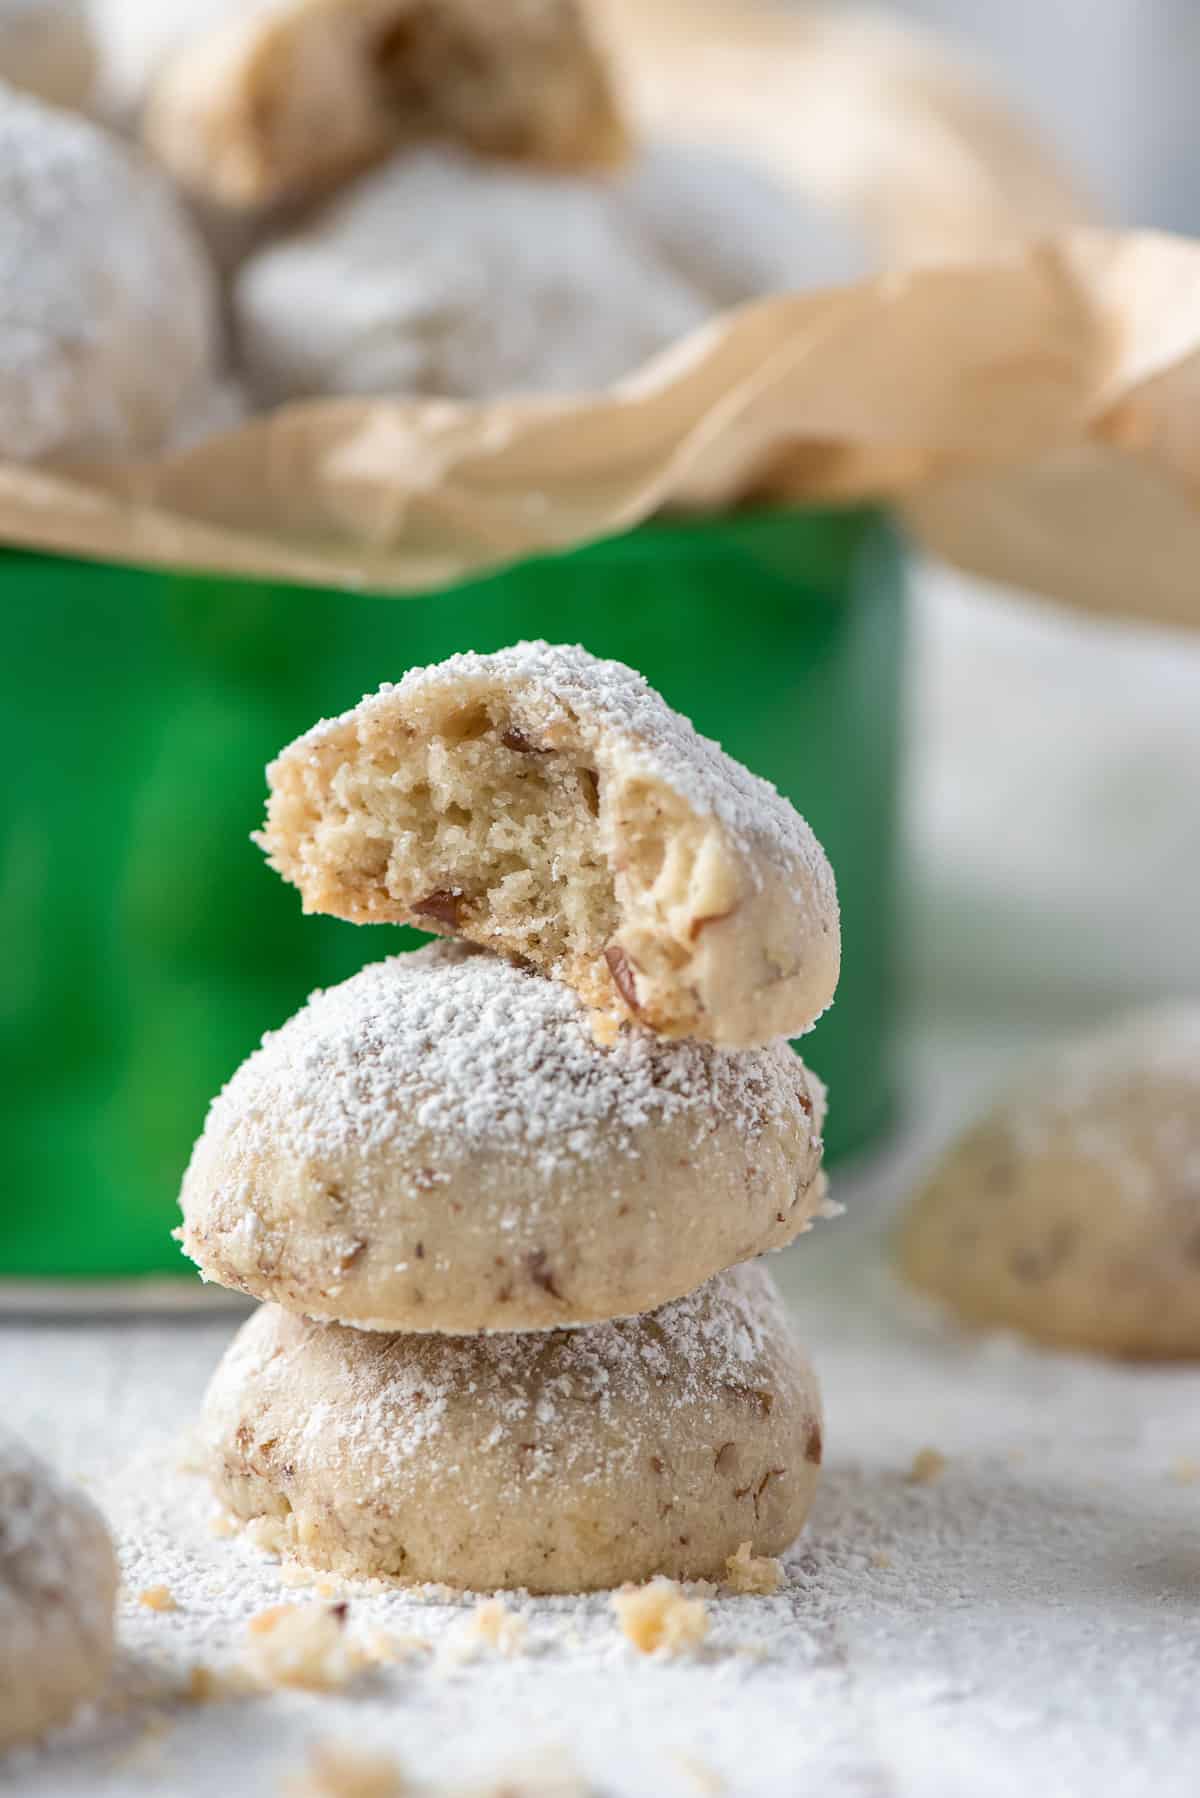 A stack of three powedered sugar dusted Pecan Sandies with a bite missing from the cookie on top.